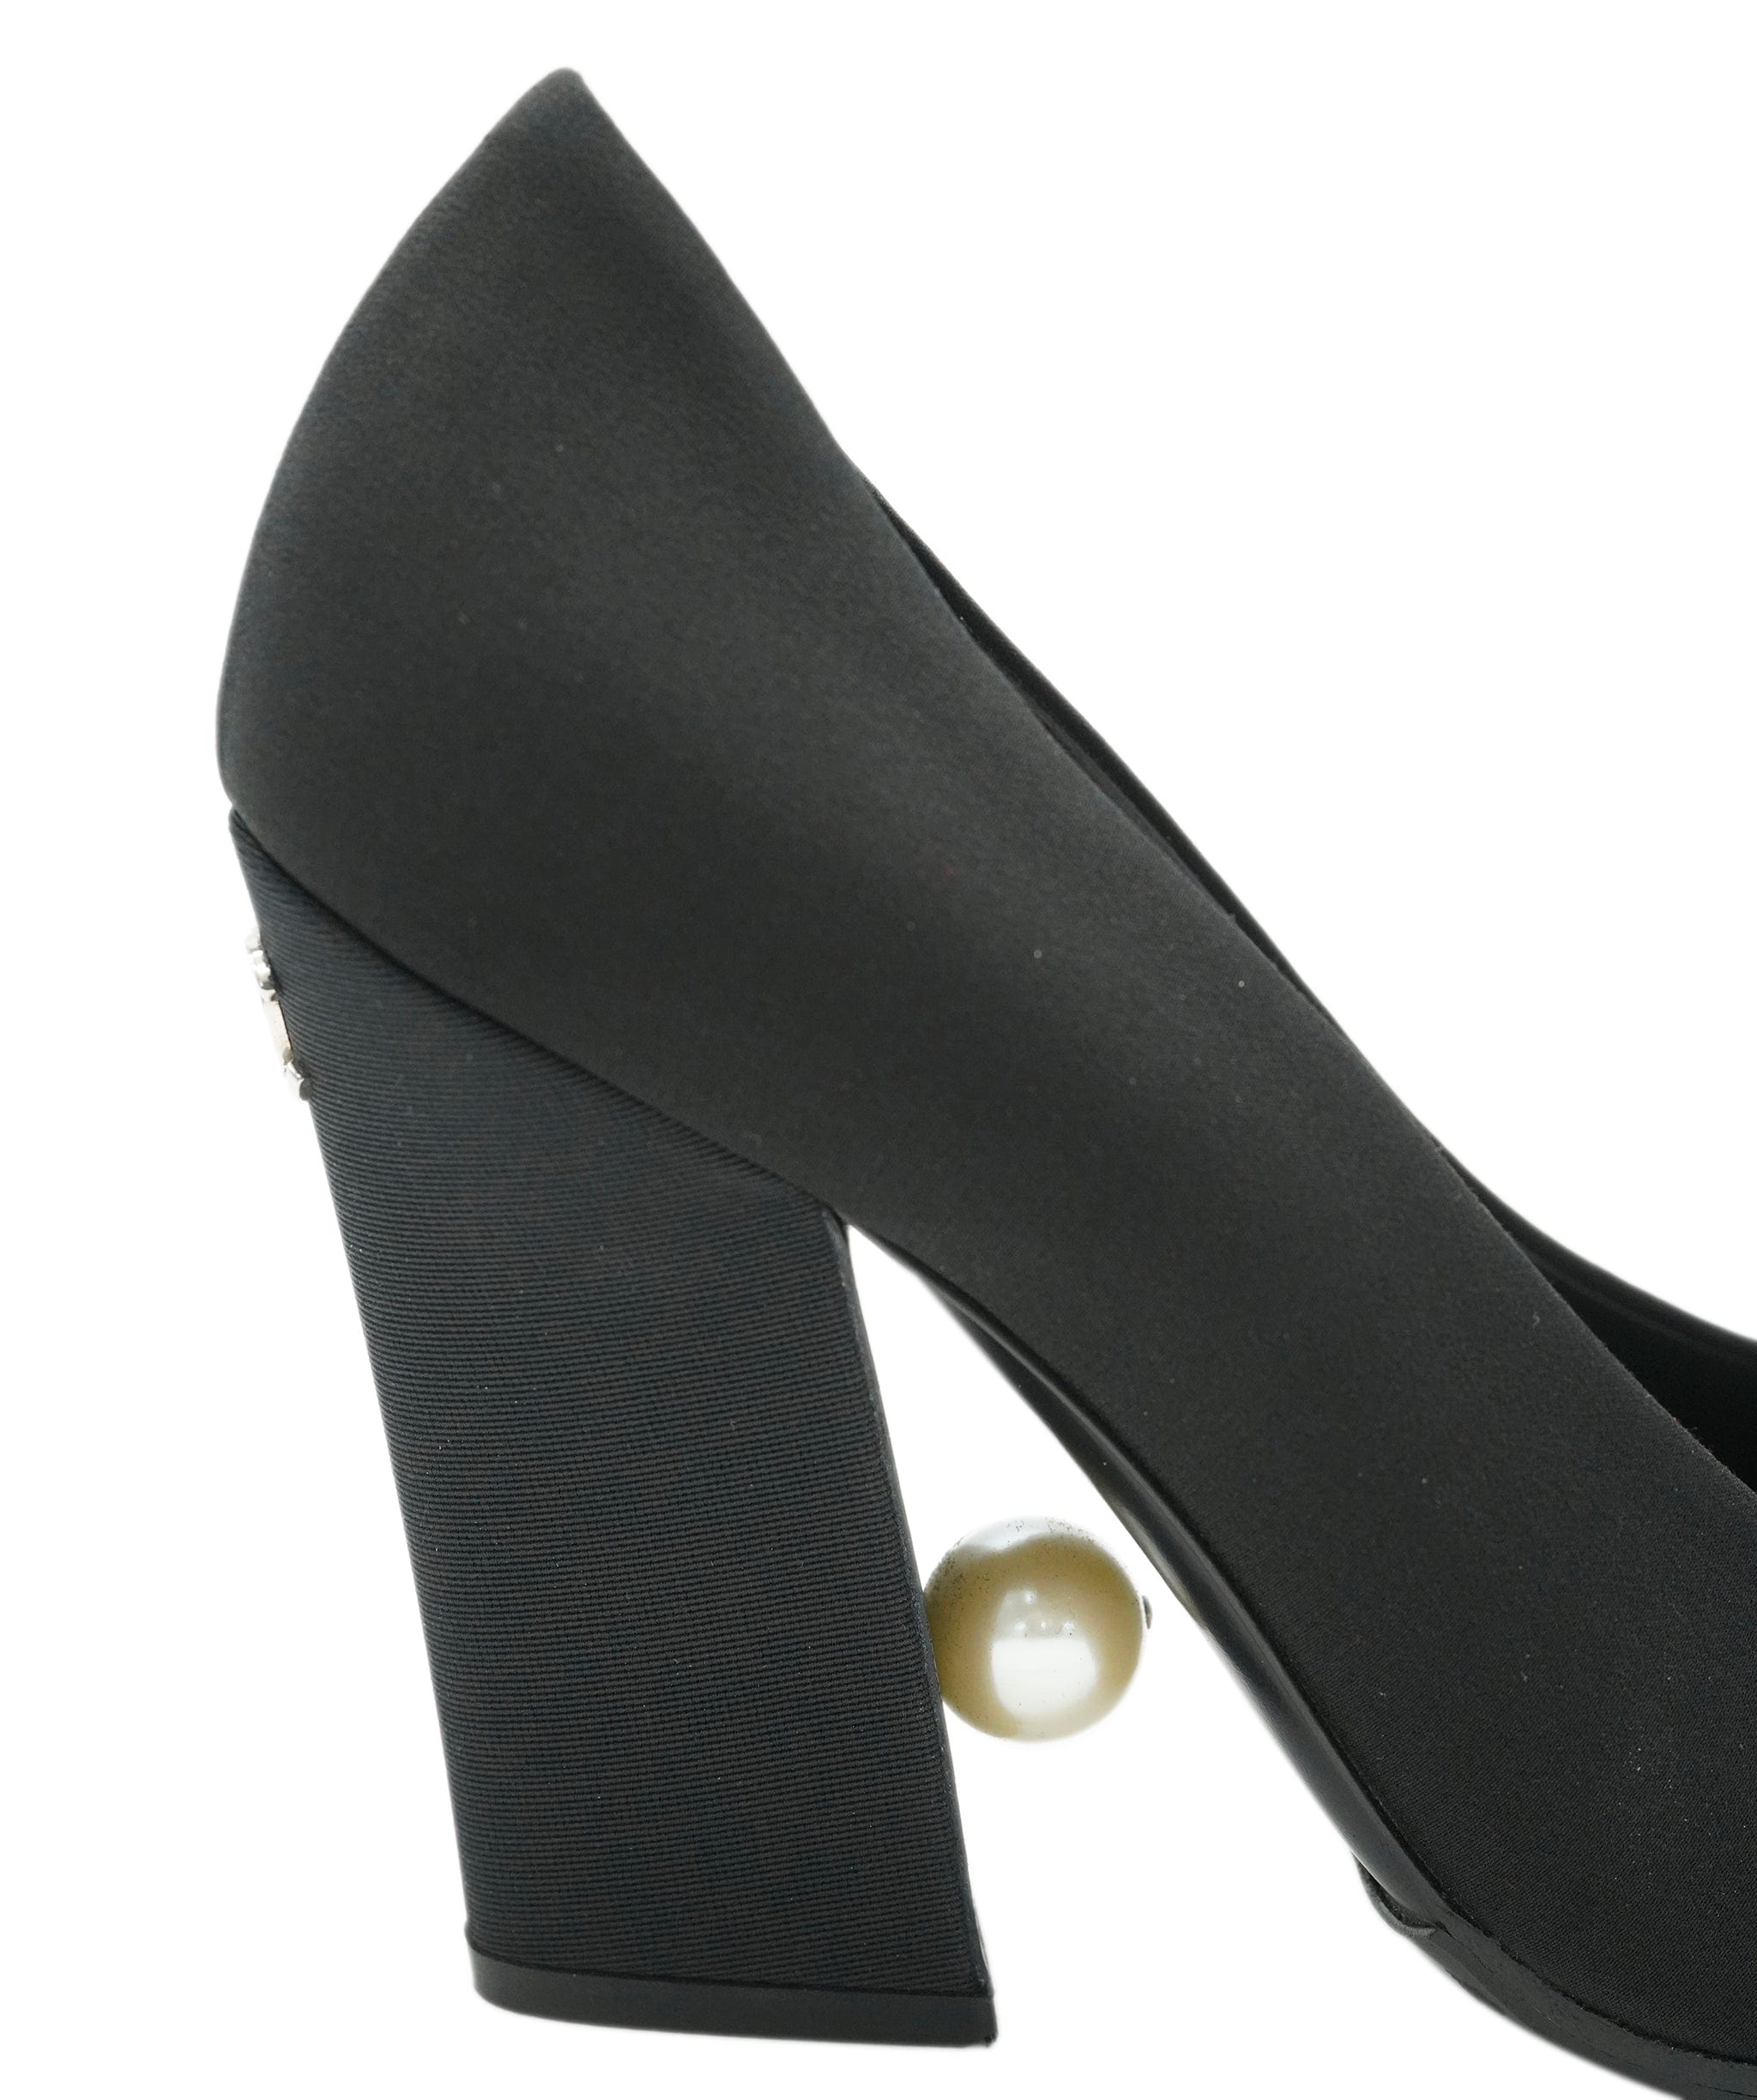 Chanel Chanel black pearl pointed heels size 38 - AJC0663